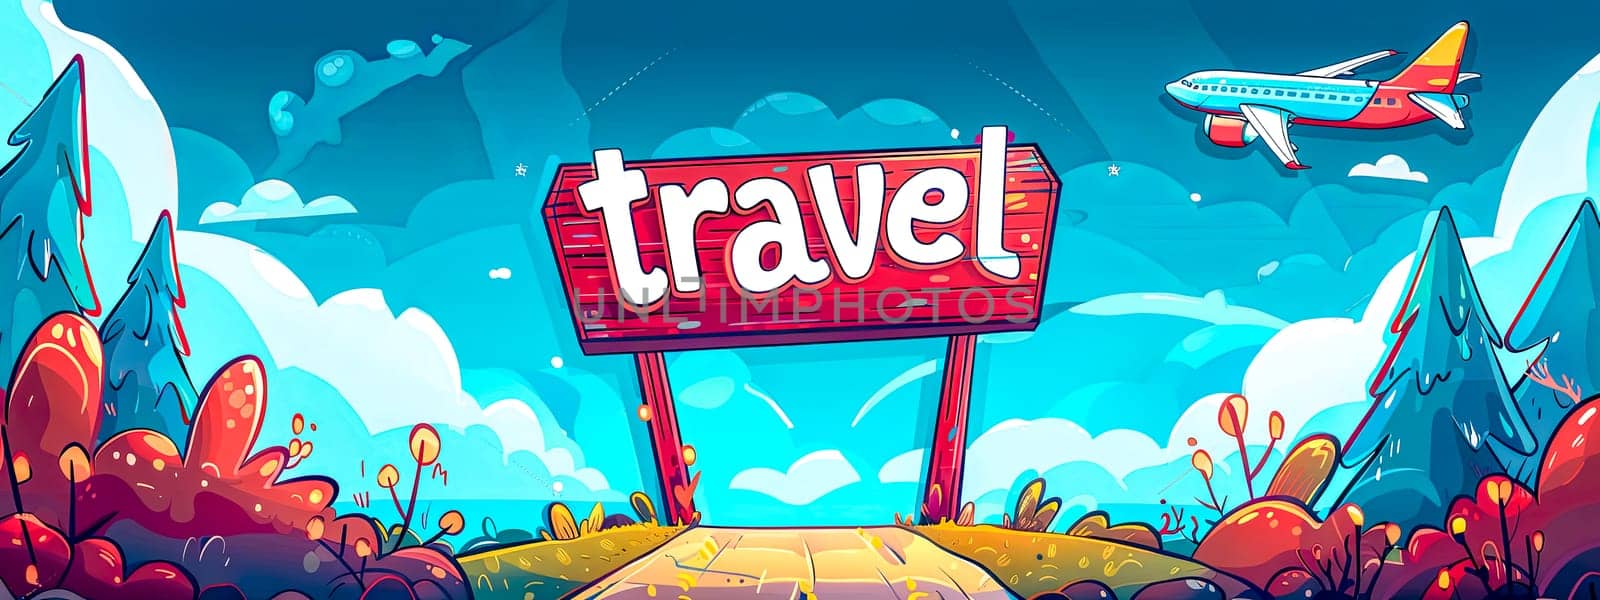 Colorful cartoon landscape with a bold travel sign, airplane, and picturesque road